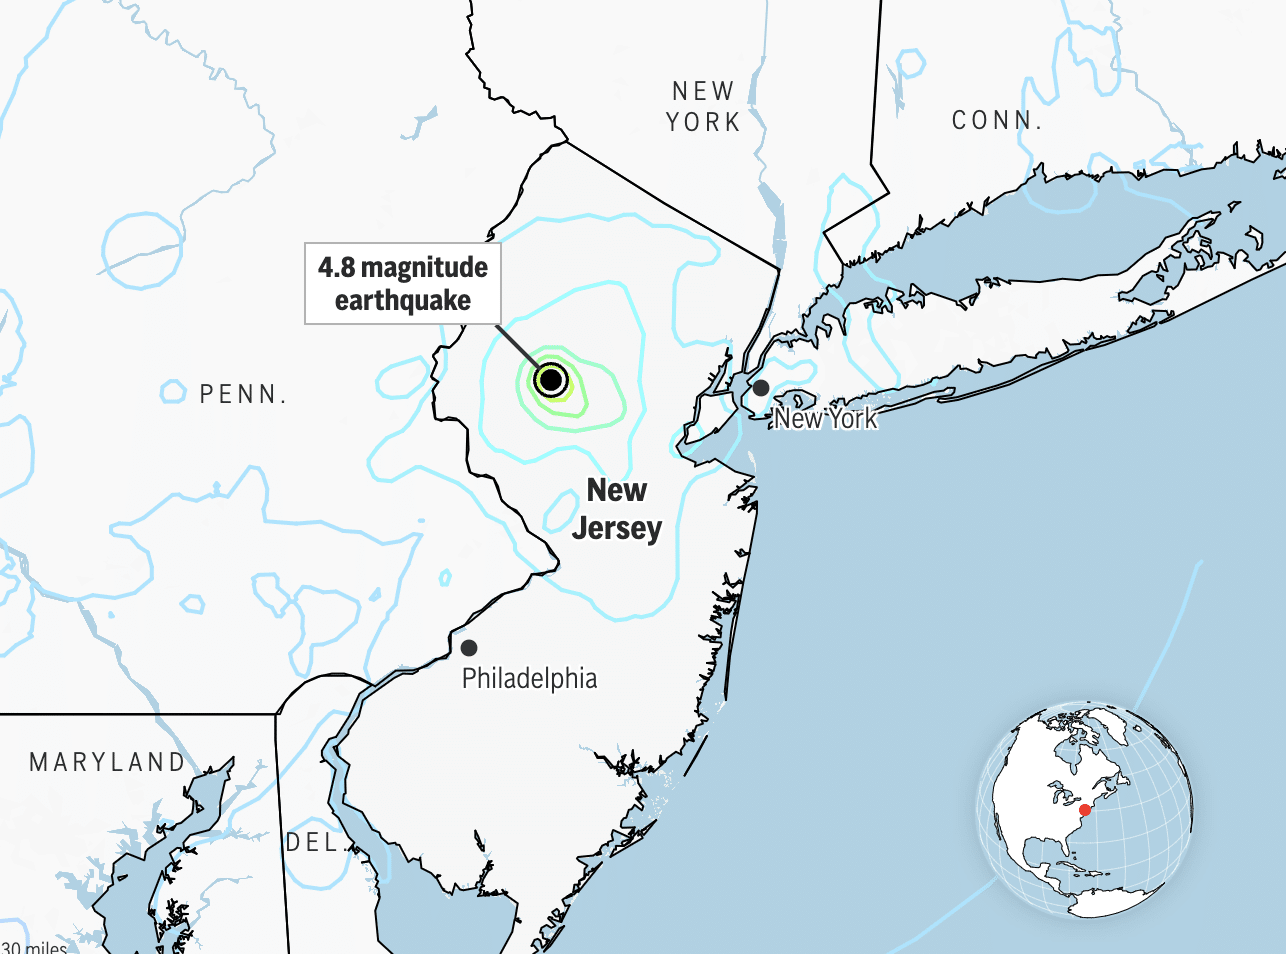 New Jersey earthquake was felt by up to 43 Million people on the East Coast